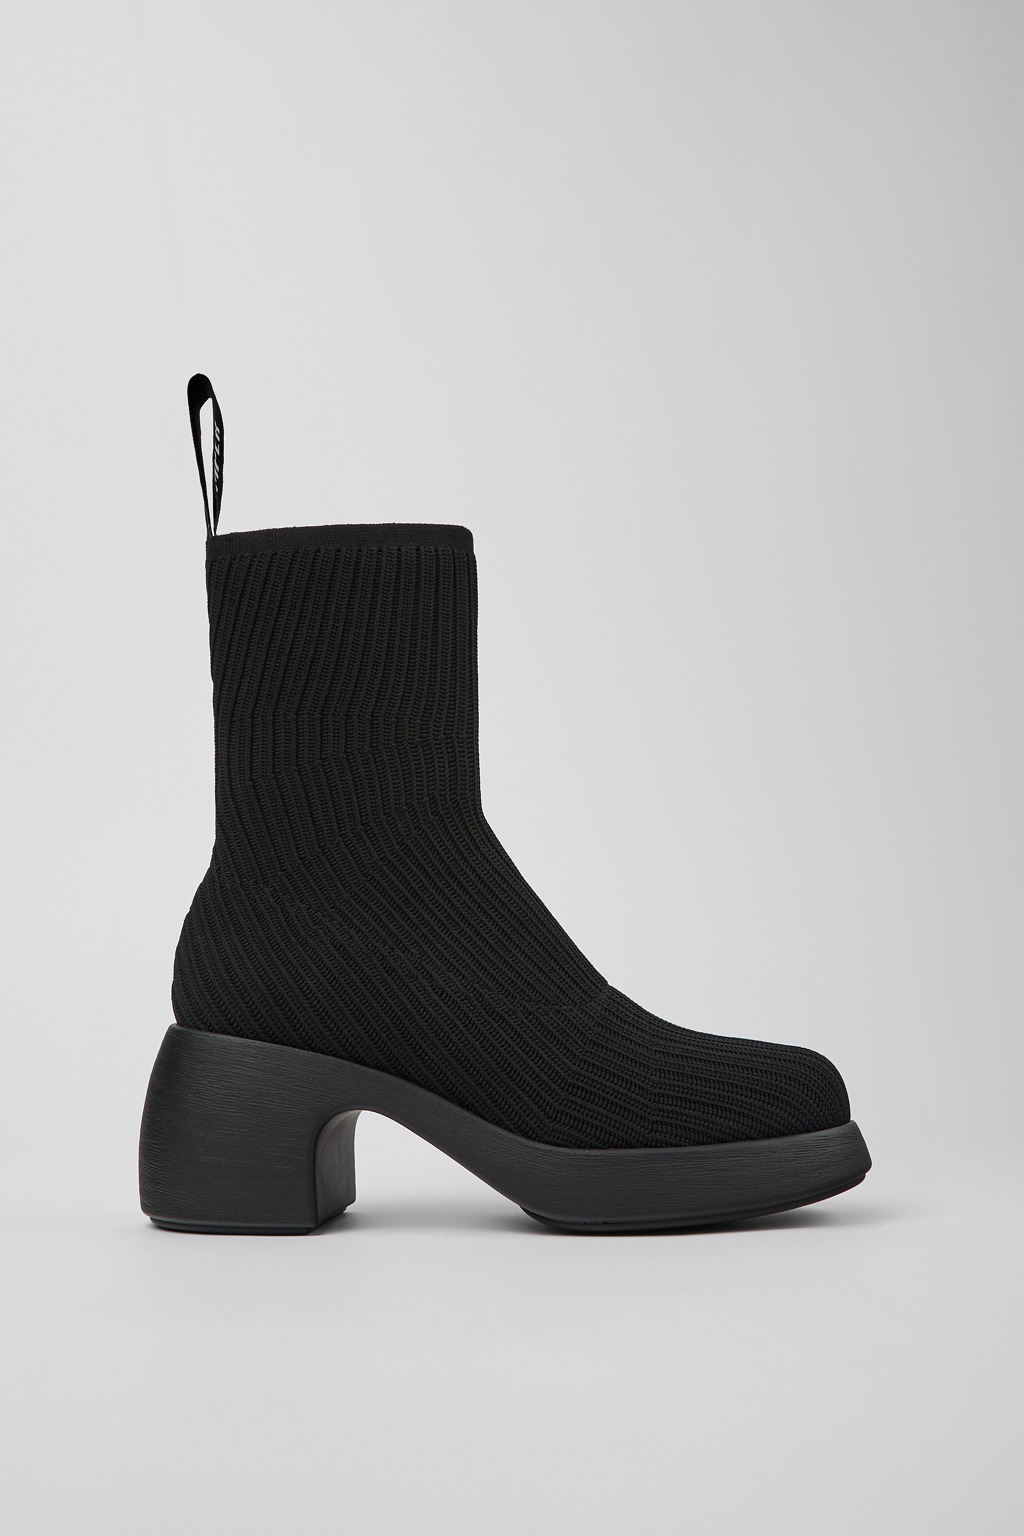 Thelma Black Ankle Boots for Women - Fall/Winter collection